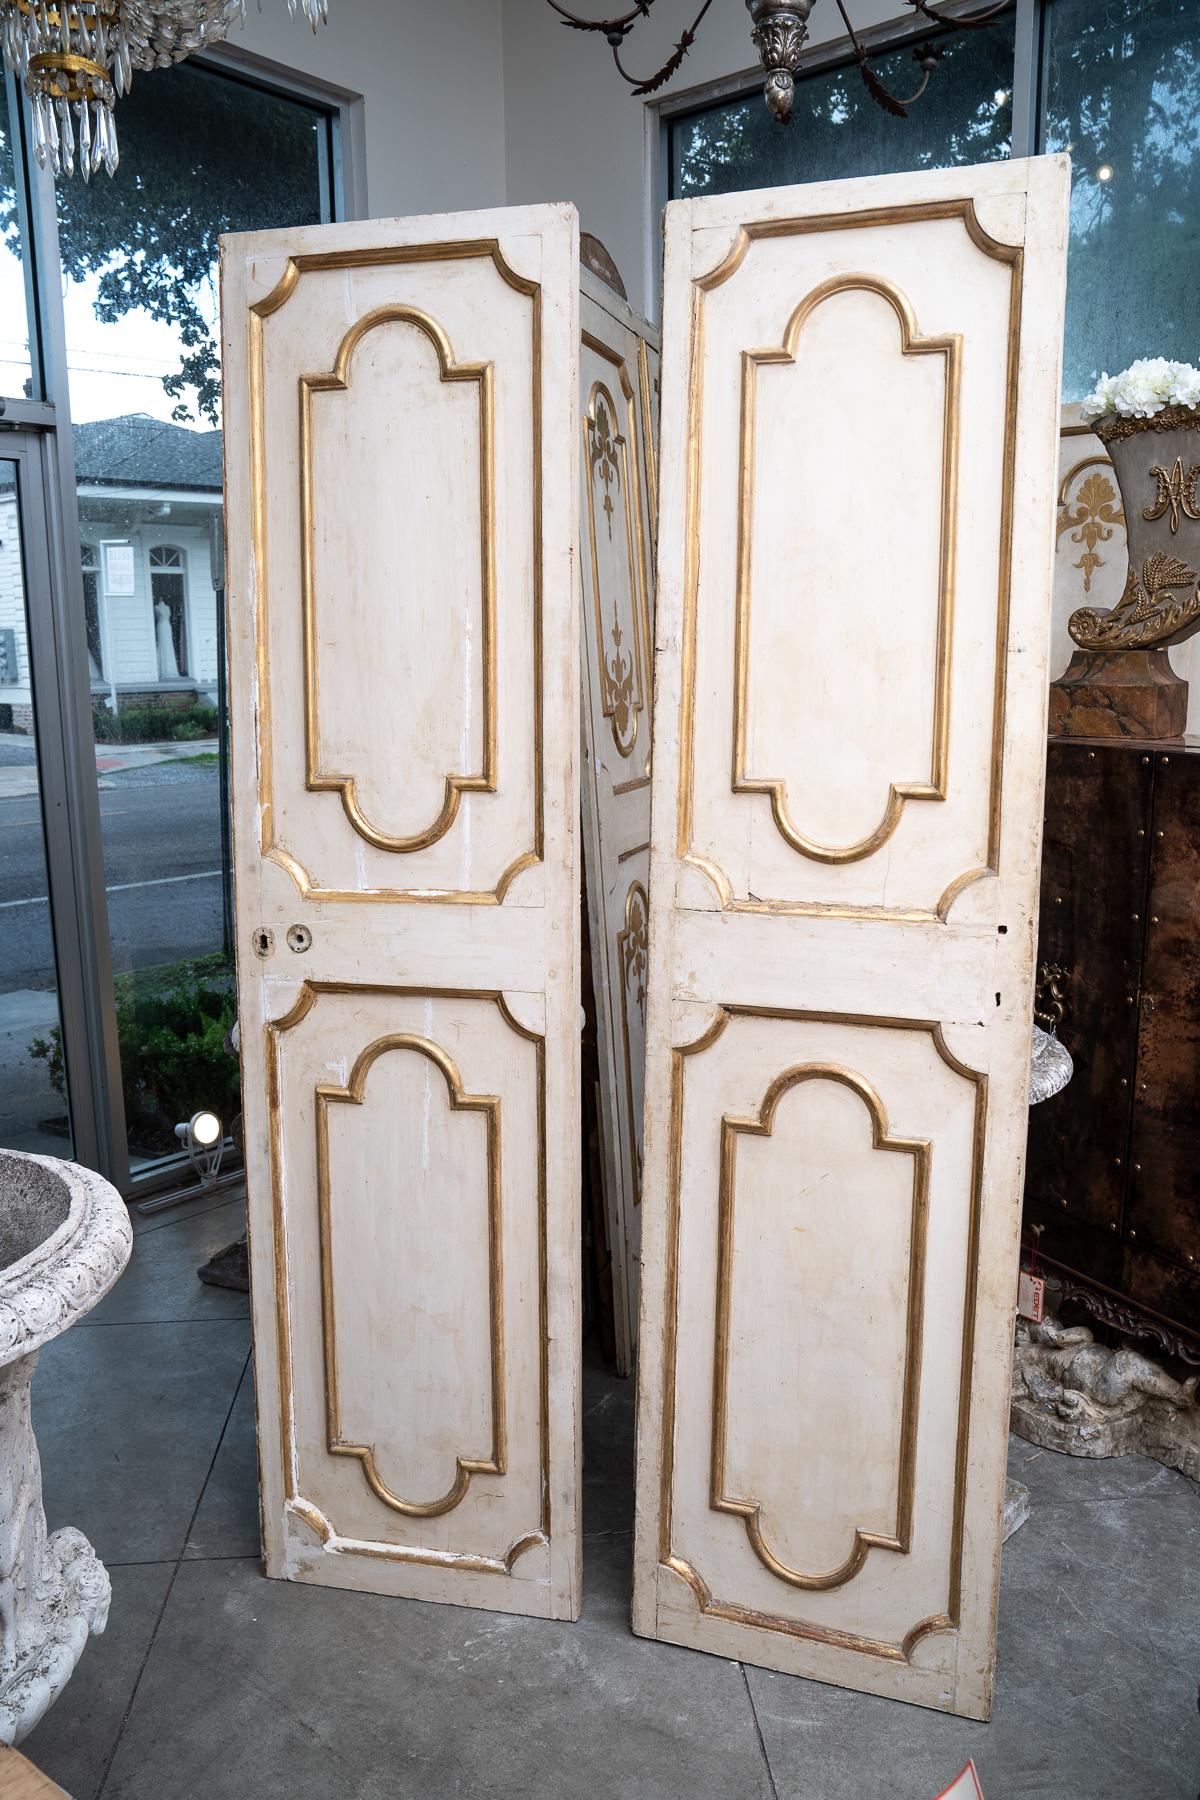 3 sets of 19th century Italian gilded and painted interior doors-some with original hardware.